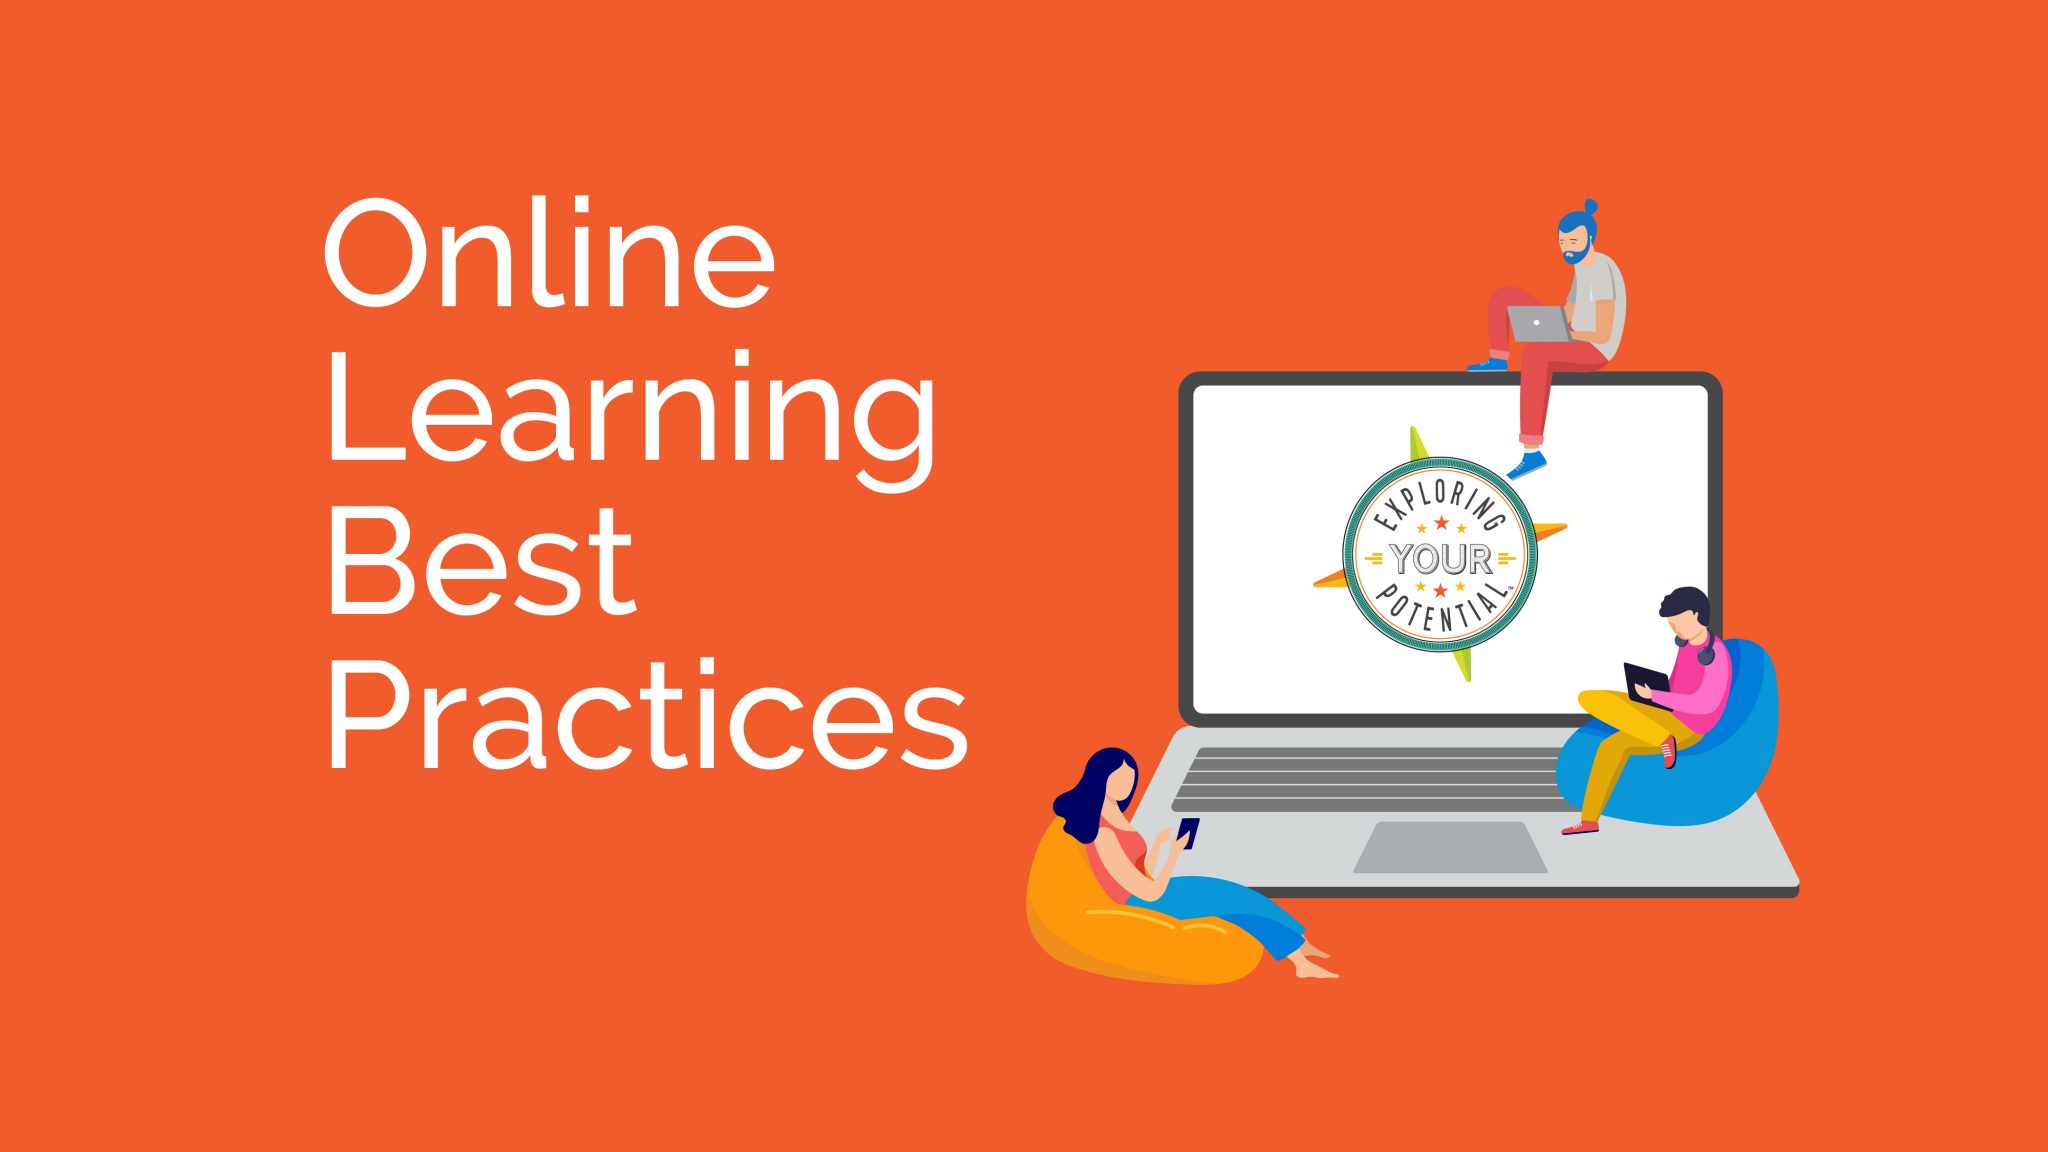 Online Learning Best Practices with Exploring Your Potential™